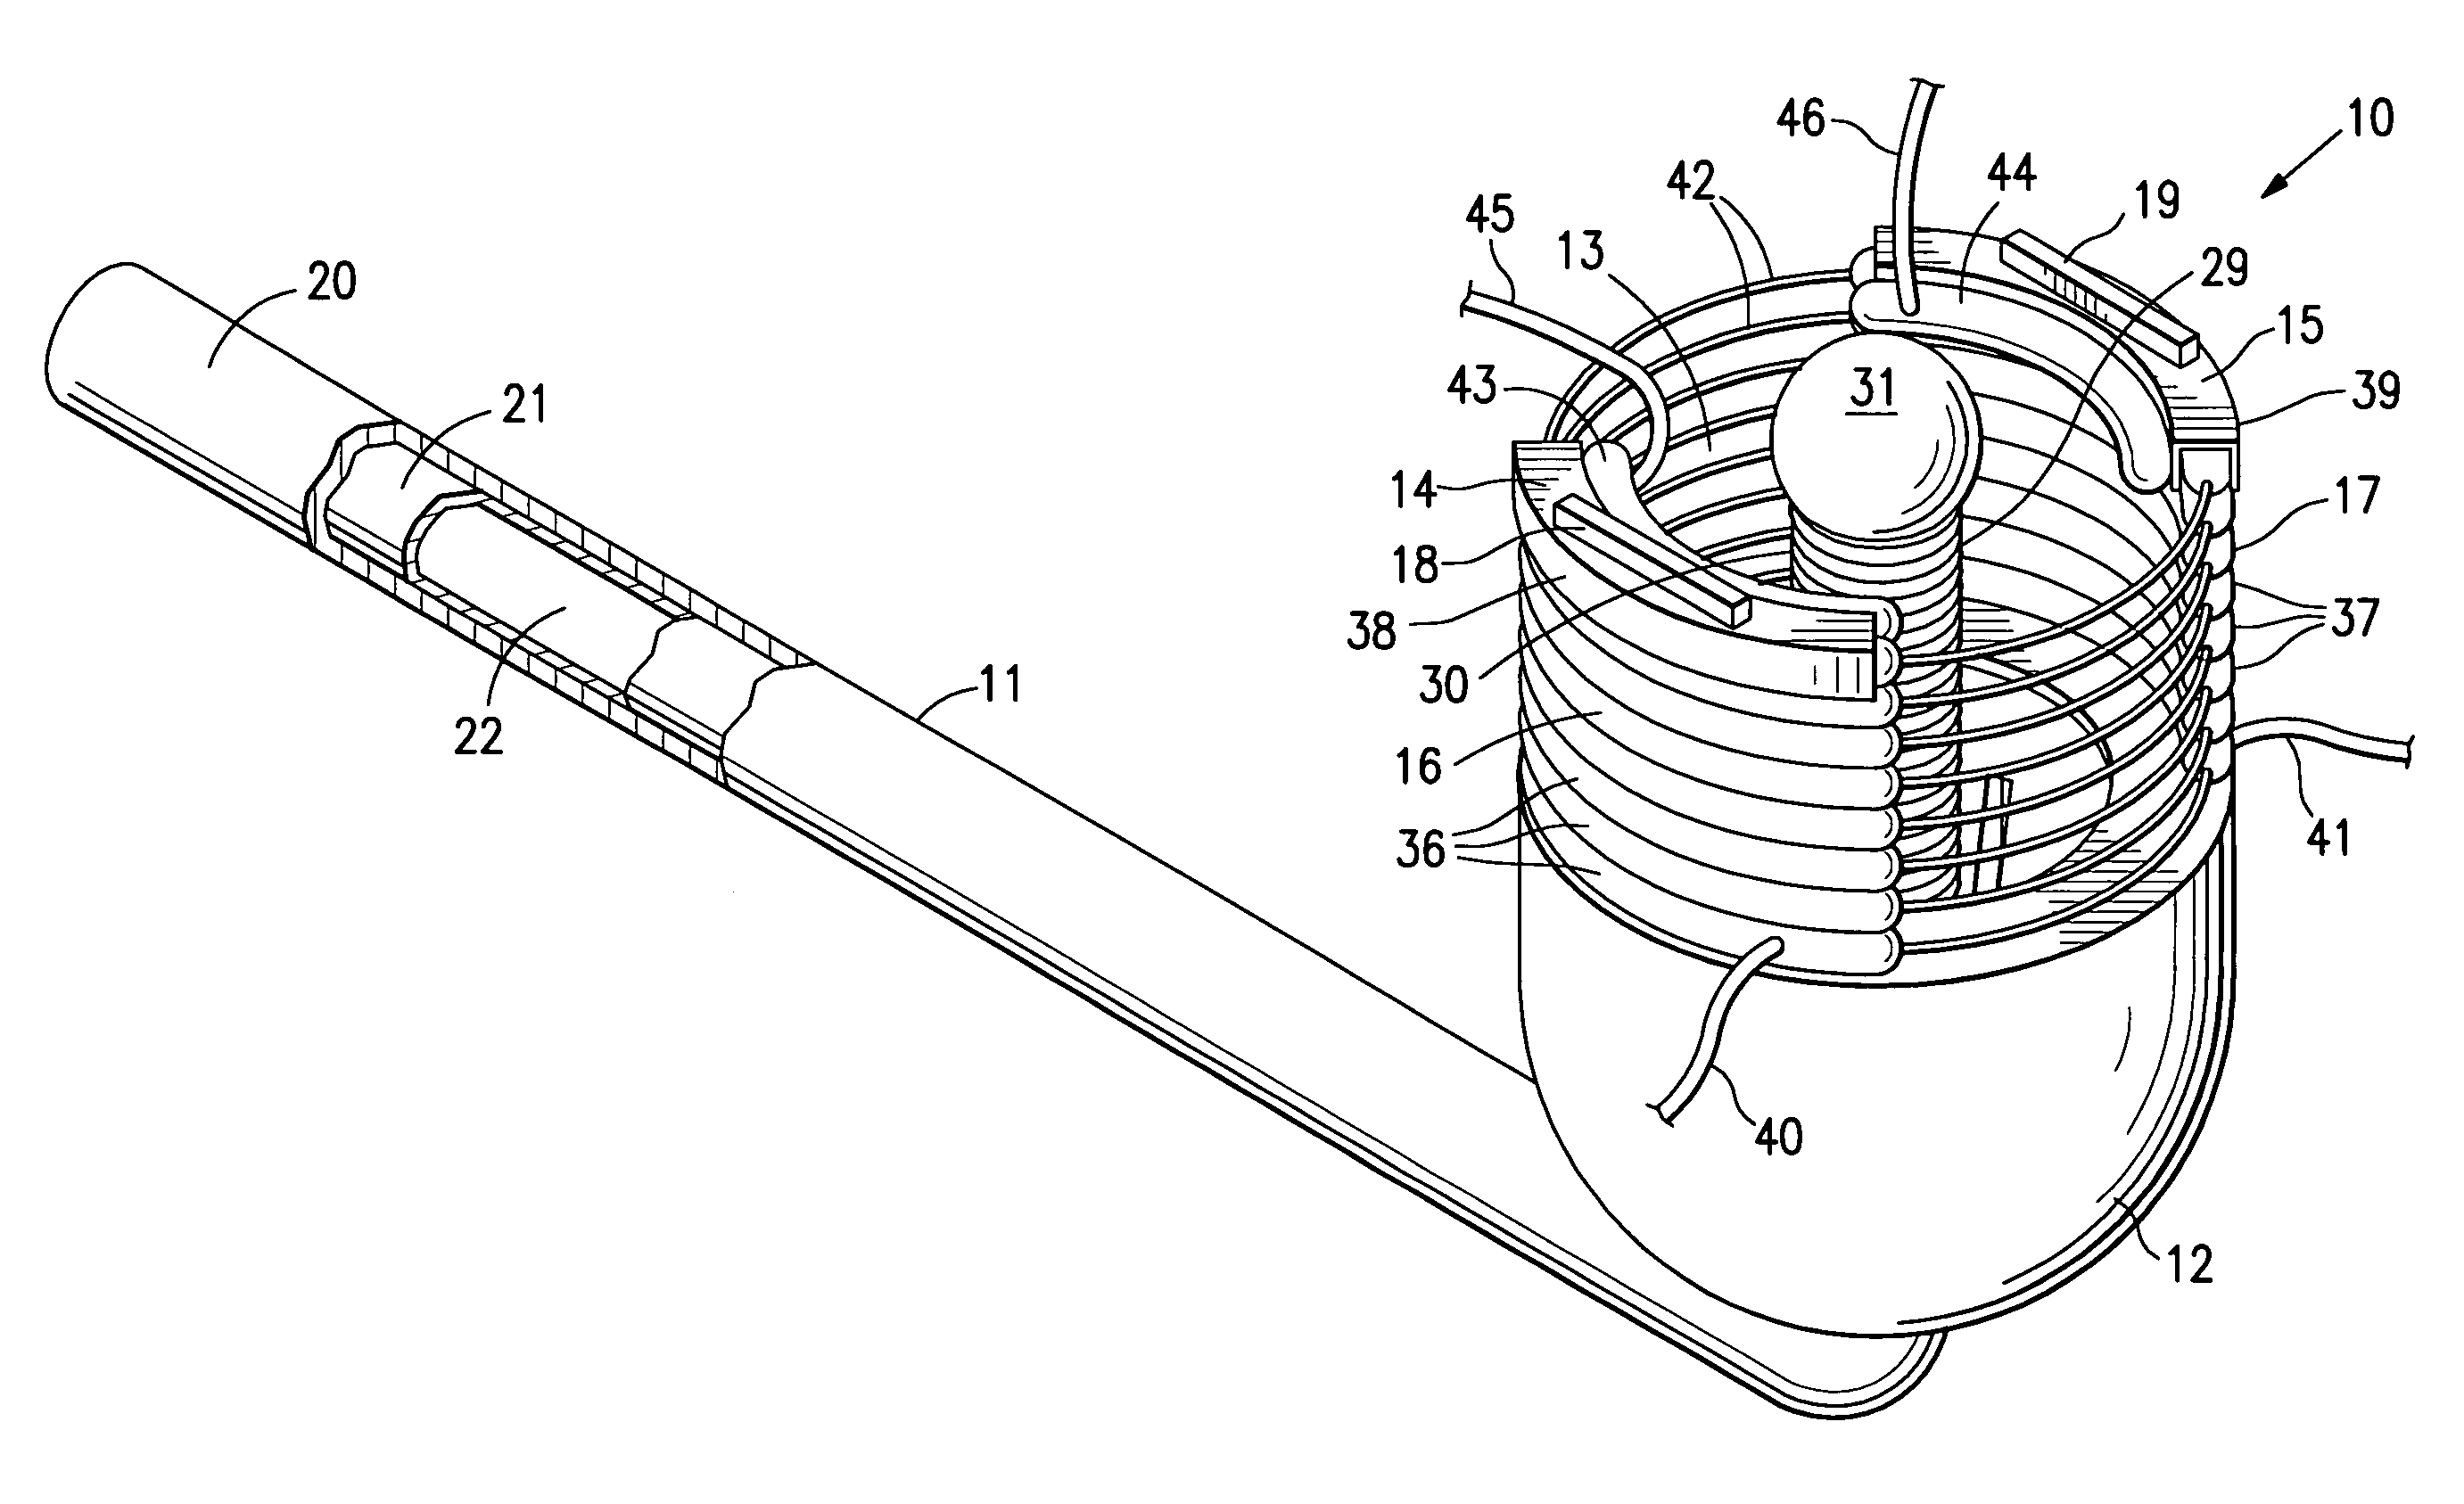 Uterine artery occlusion device with cervical receptacle